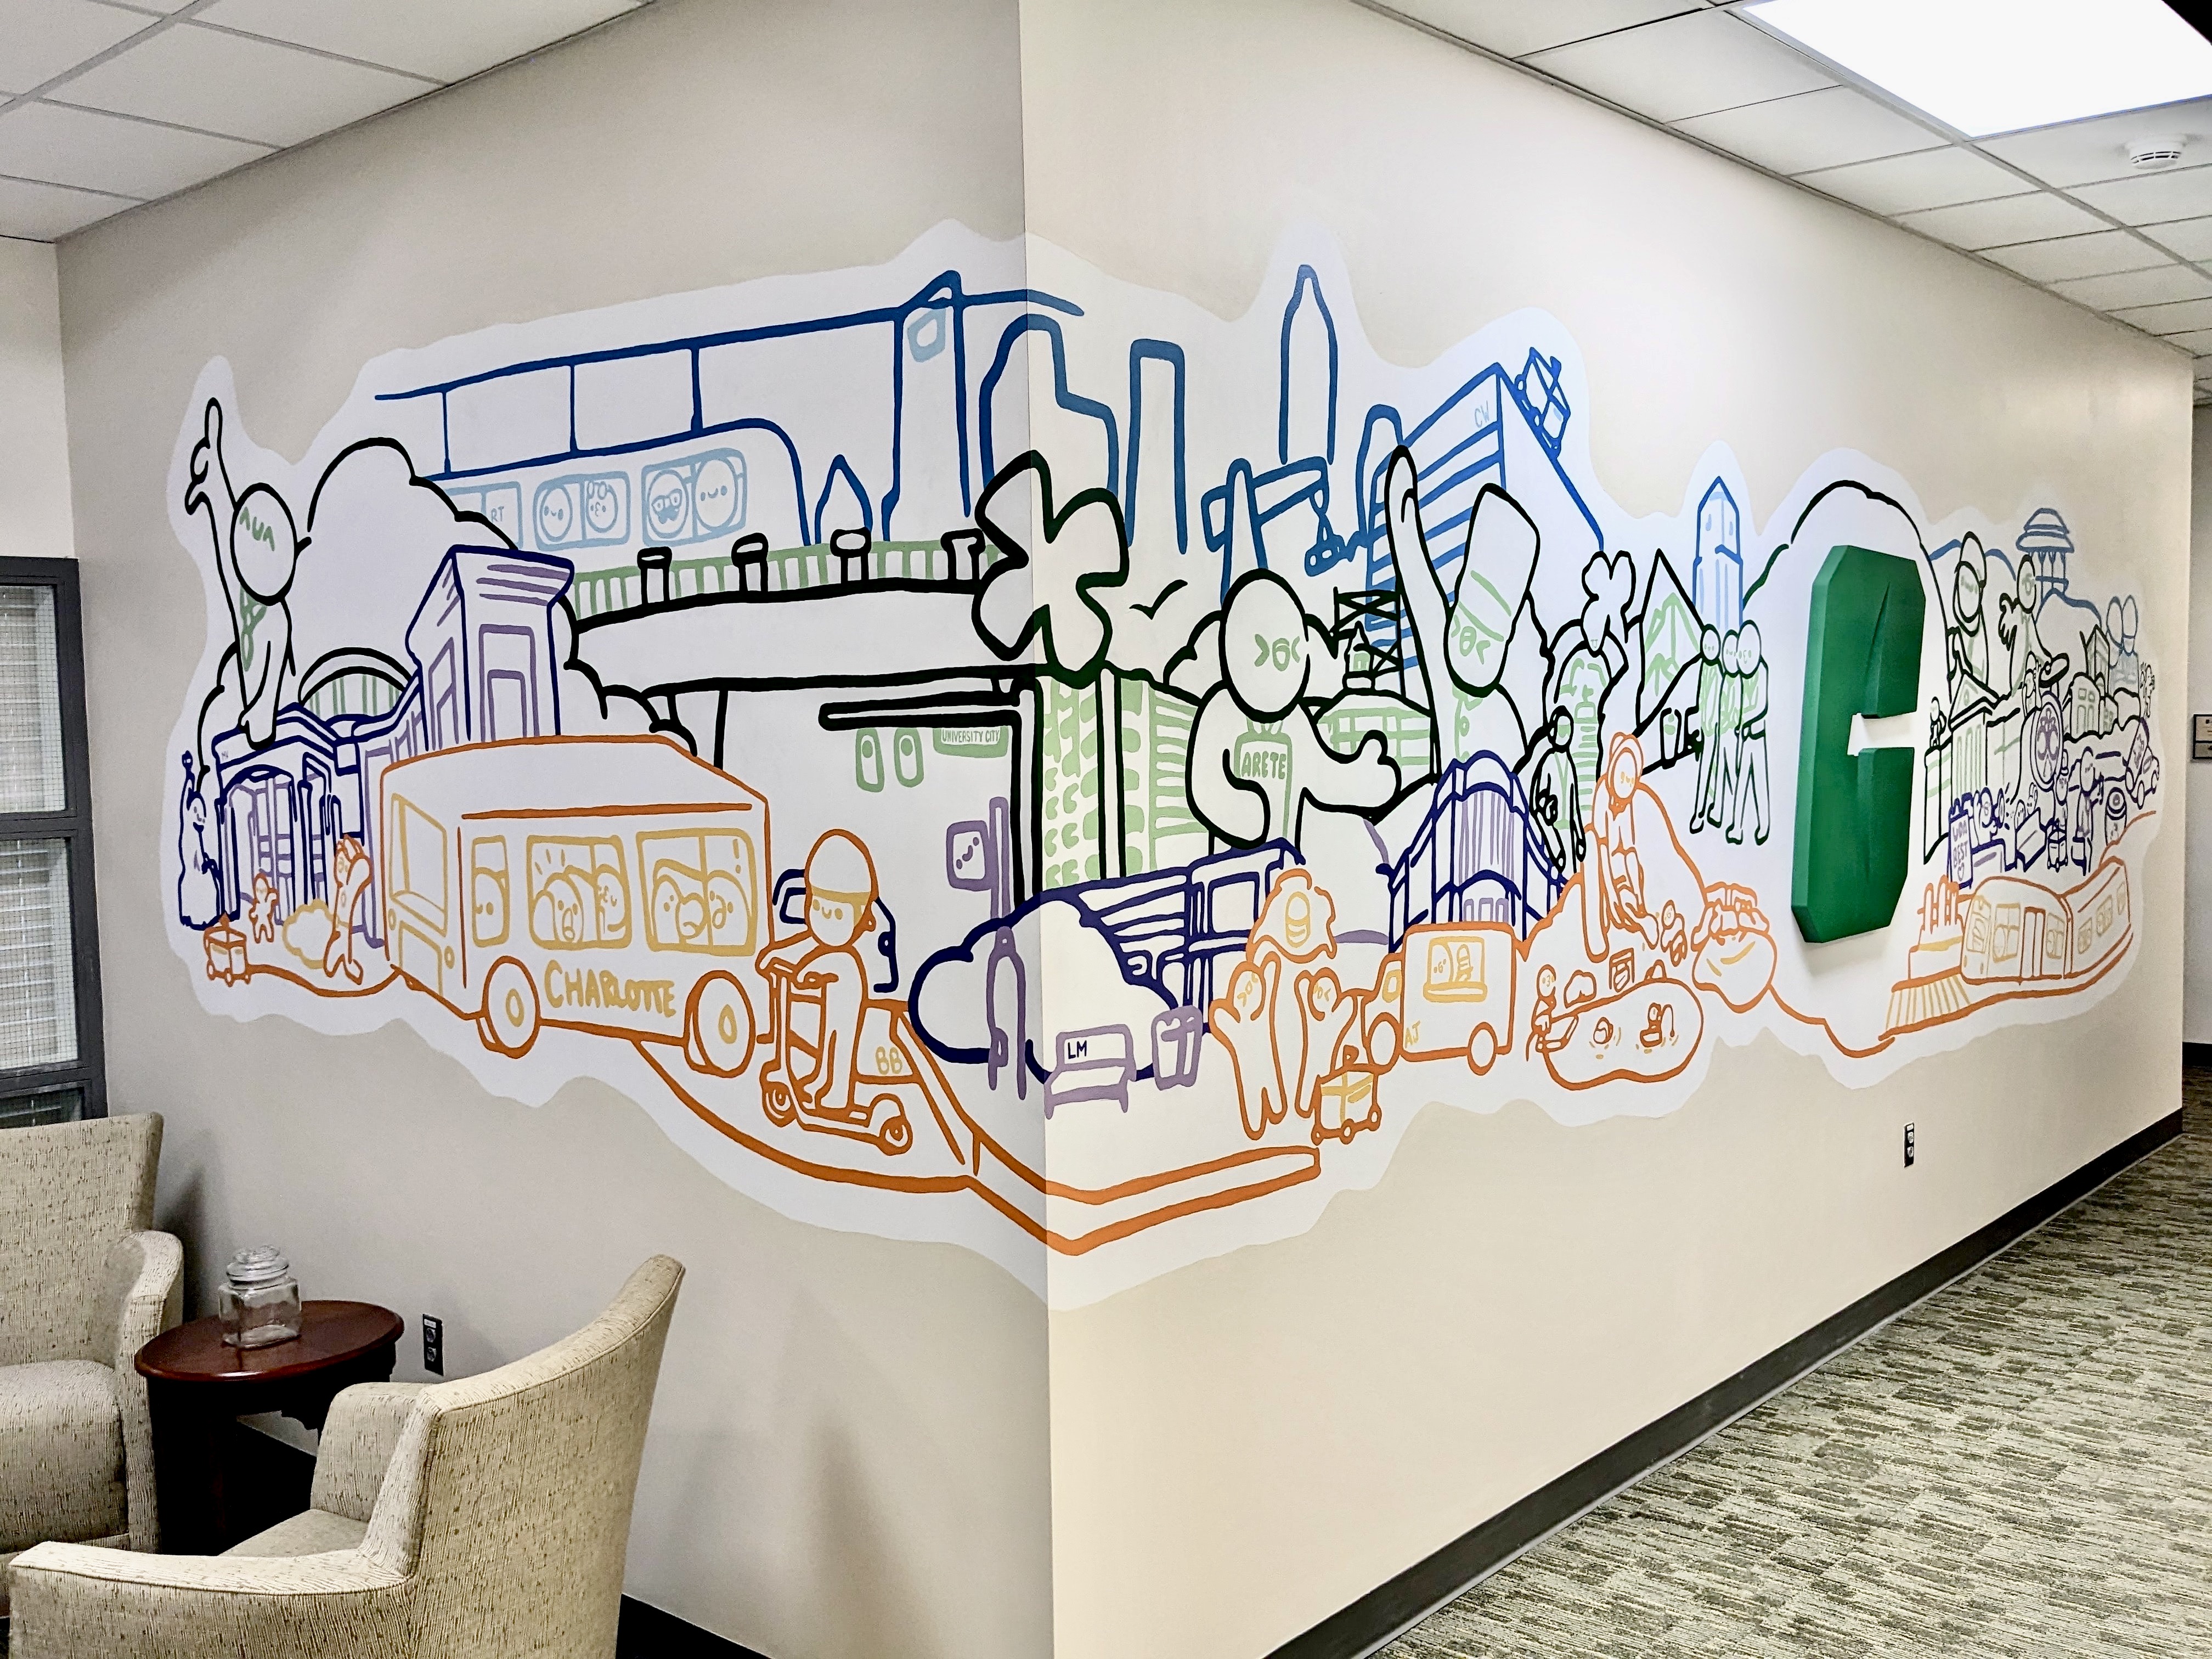 Graphic design students create business affairs mural, showcasing what is truly ‘Behind the C’ | Inside UNC Charlotte